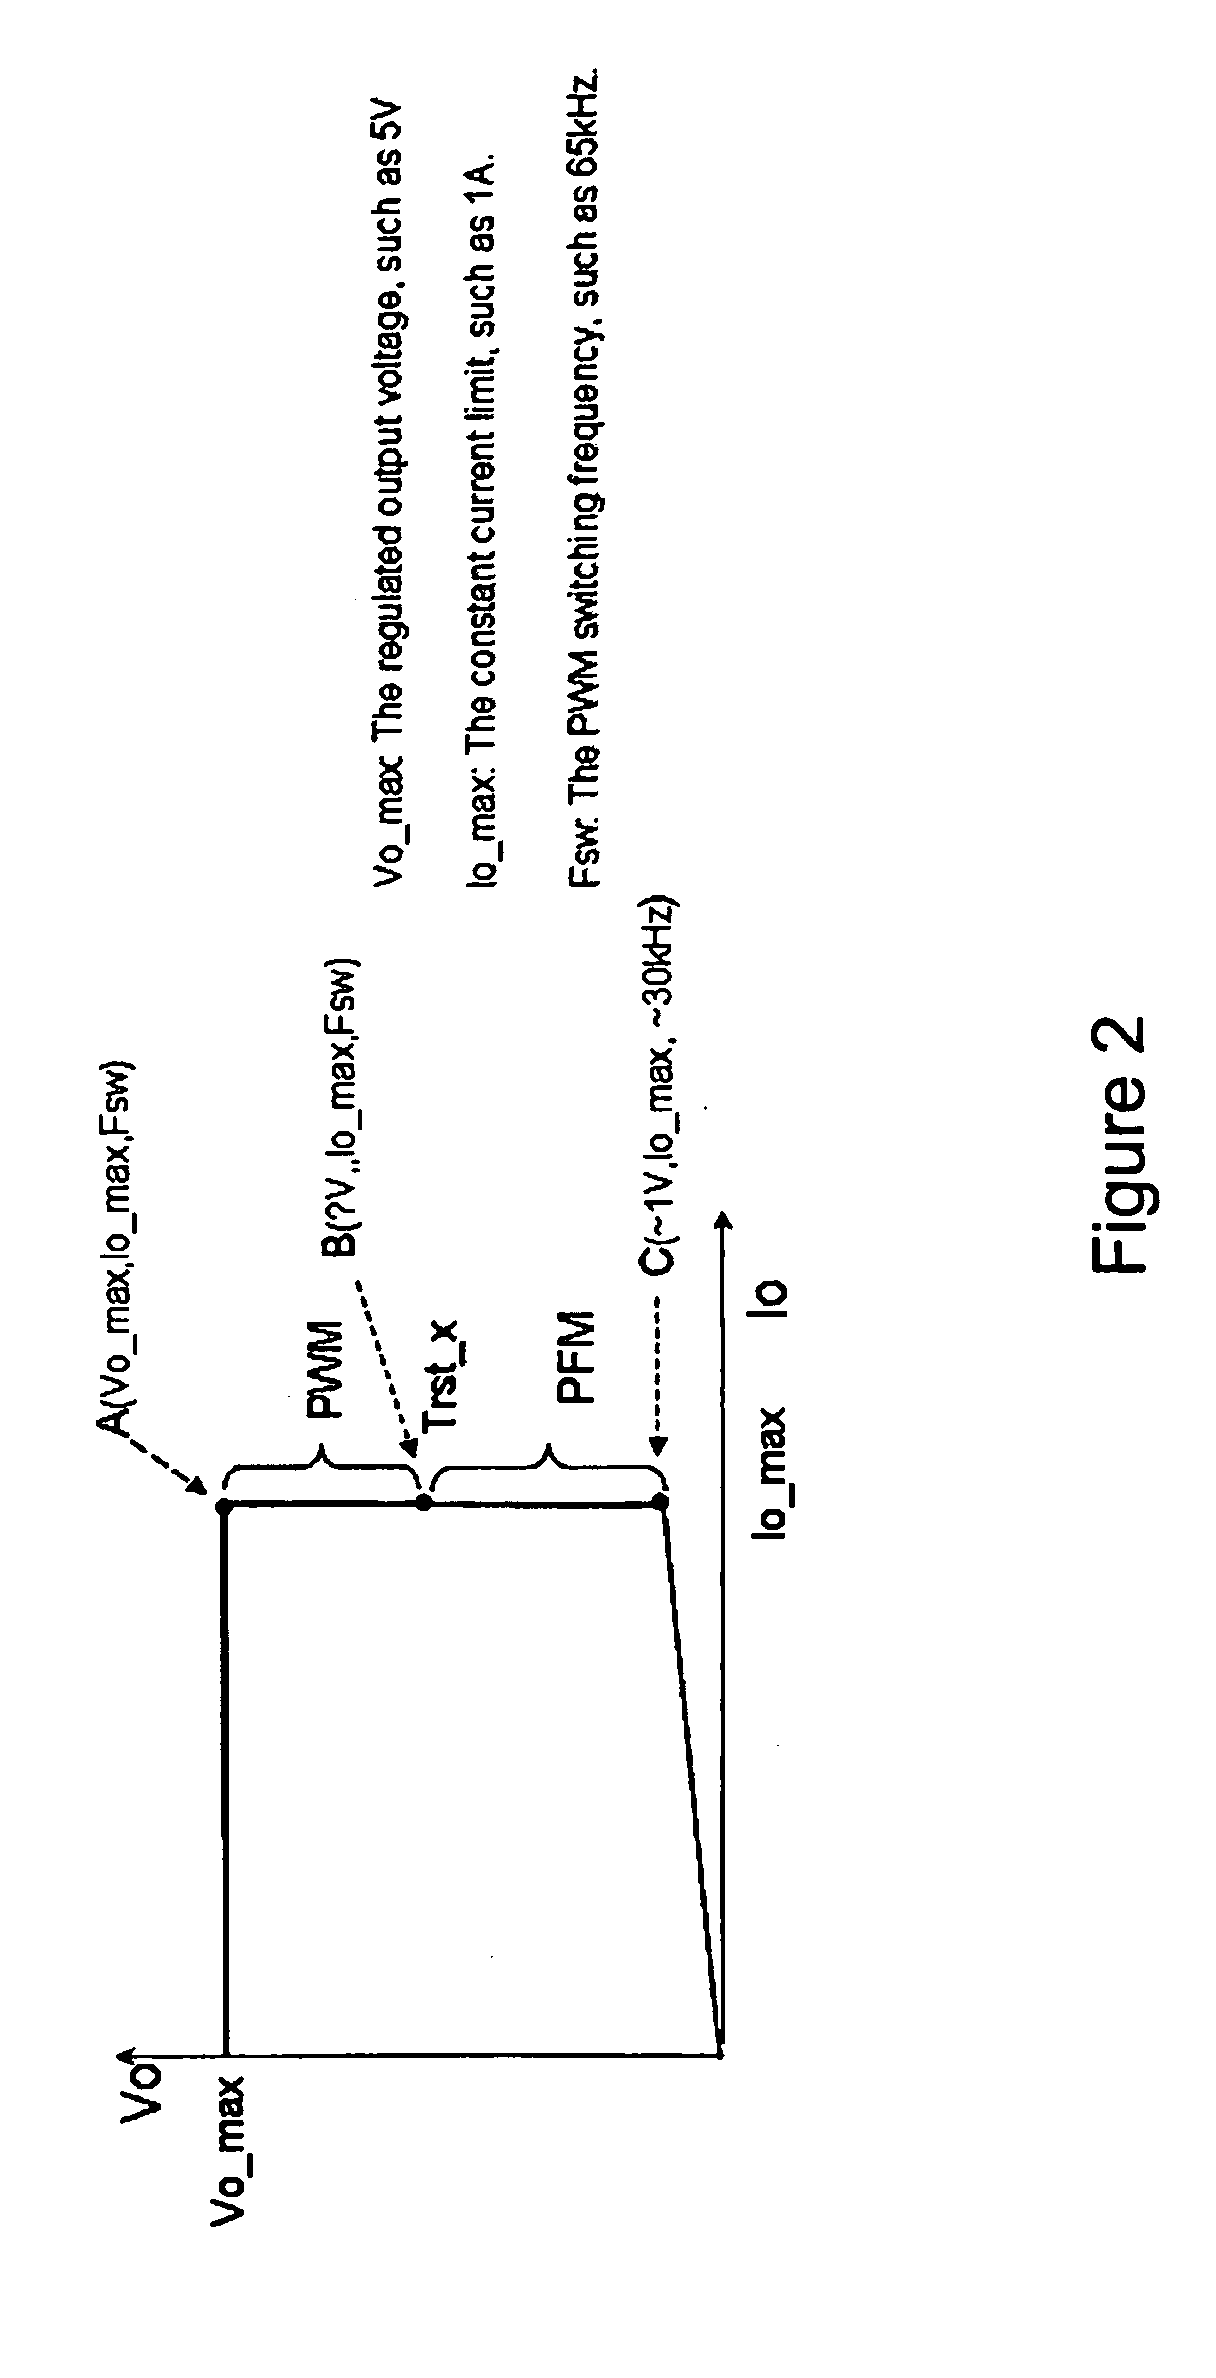 System And Method For Controlling A Current Limit With Primary Side Sensing Using A Hybrid PWM and PFM Control